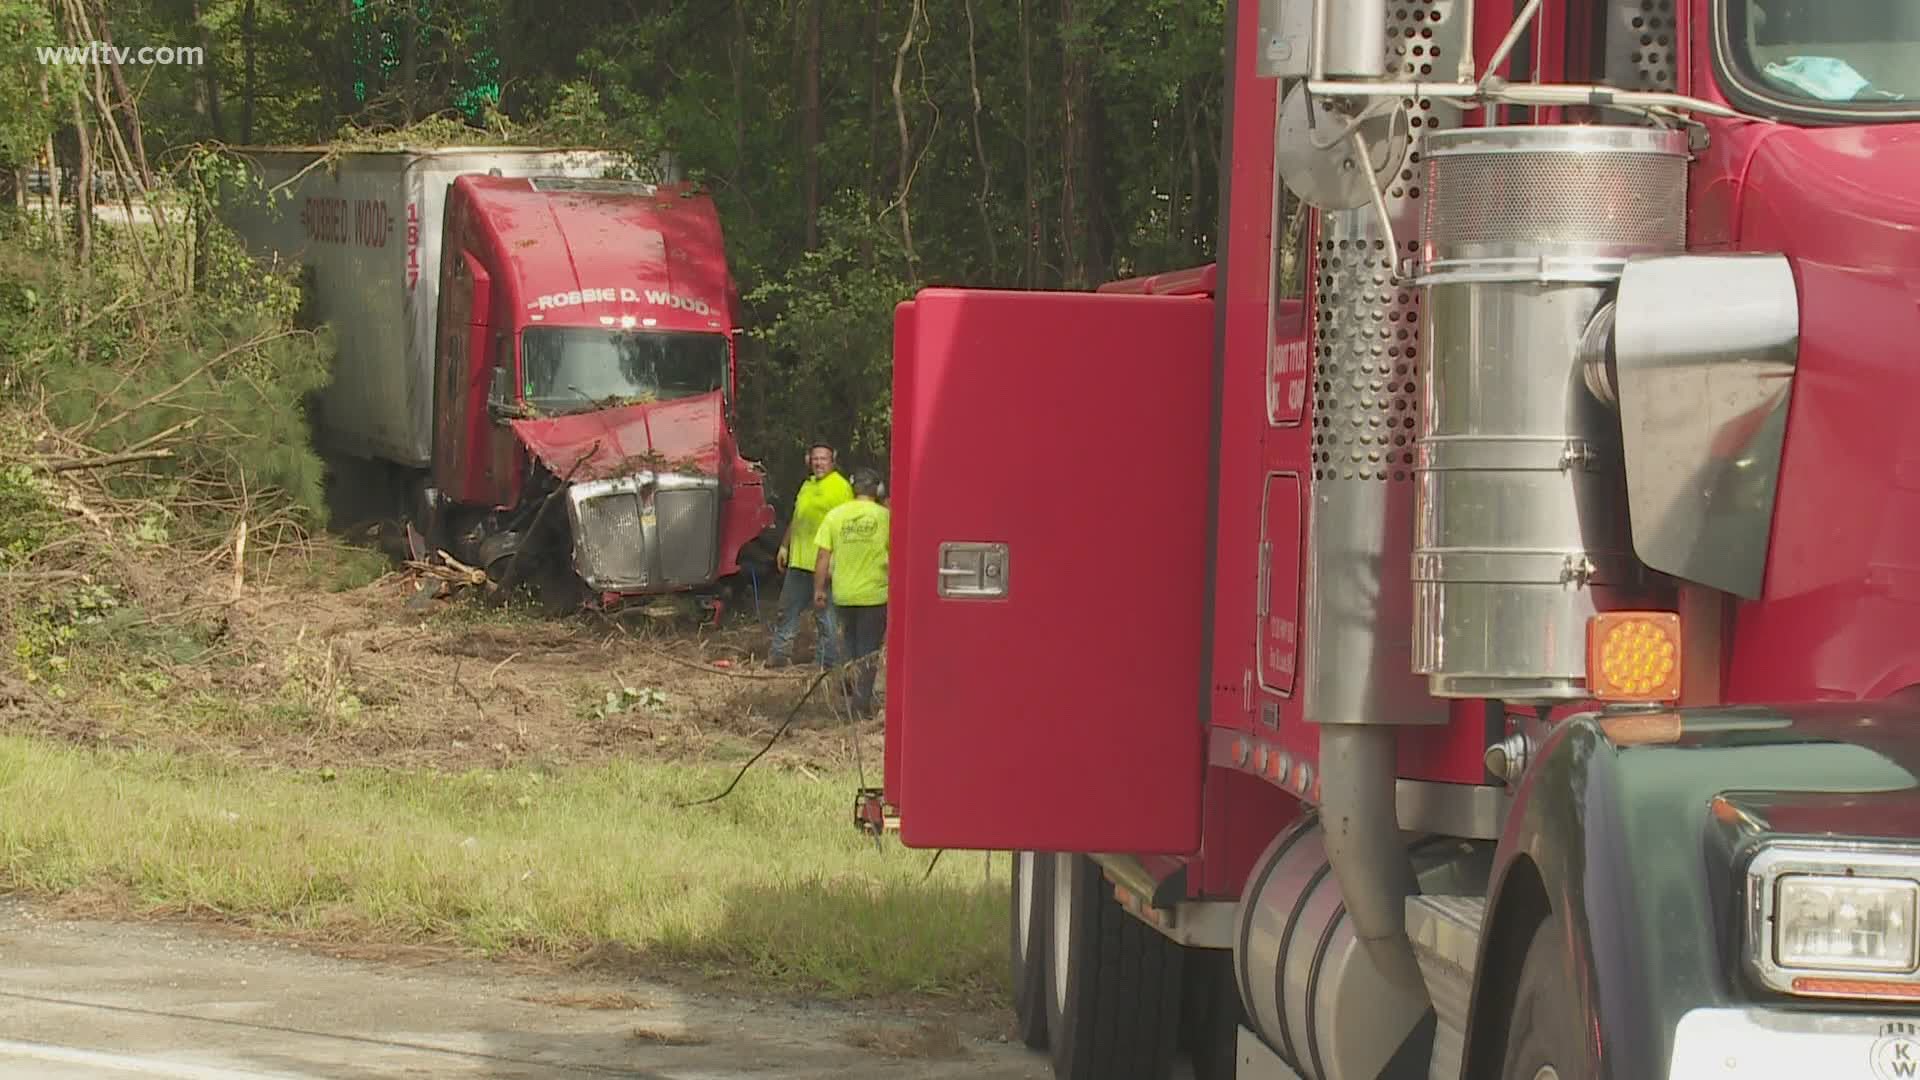 18-wheeler, filled with hazardous materials, crashes near Mississippi state line18-wheeler, filled with hazardous materials, crashes near Mississippi state line